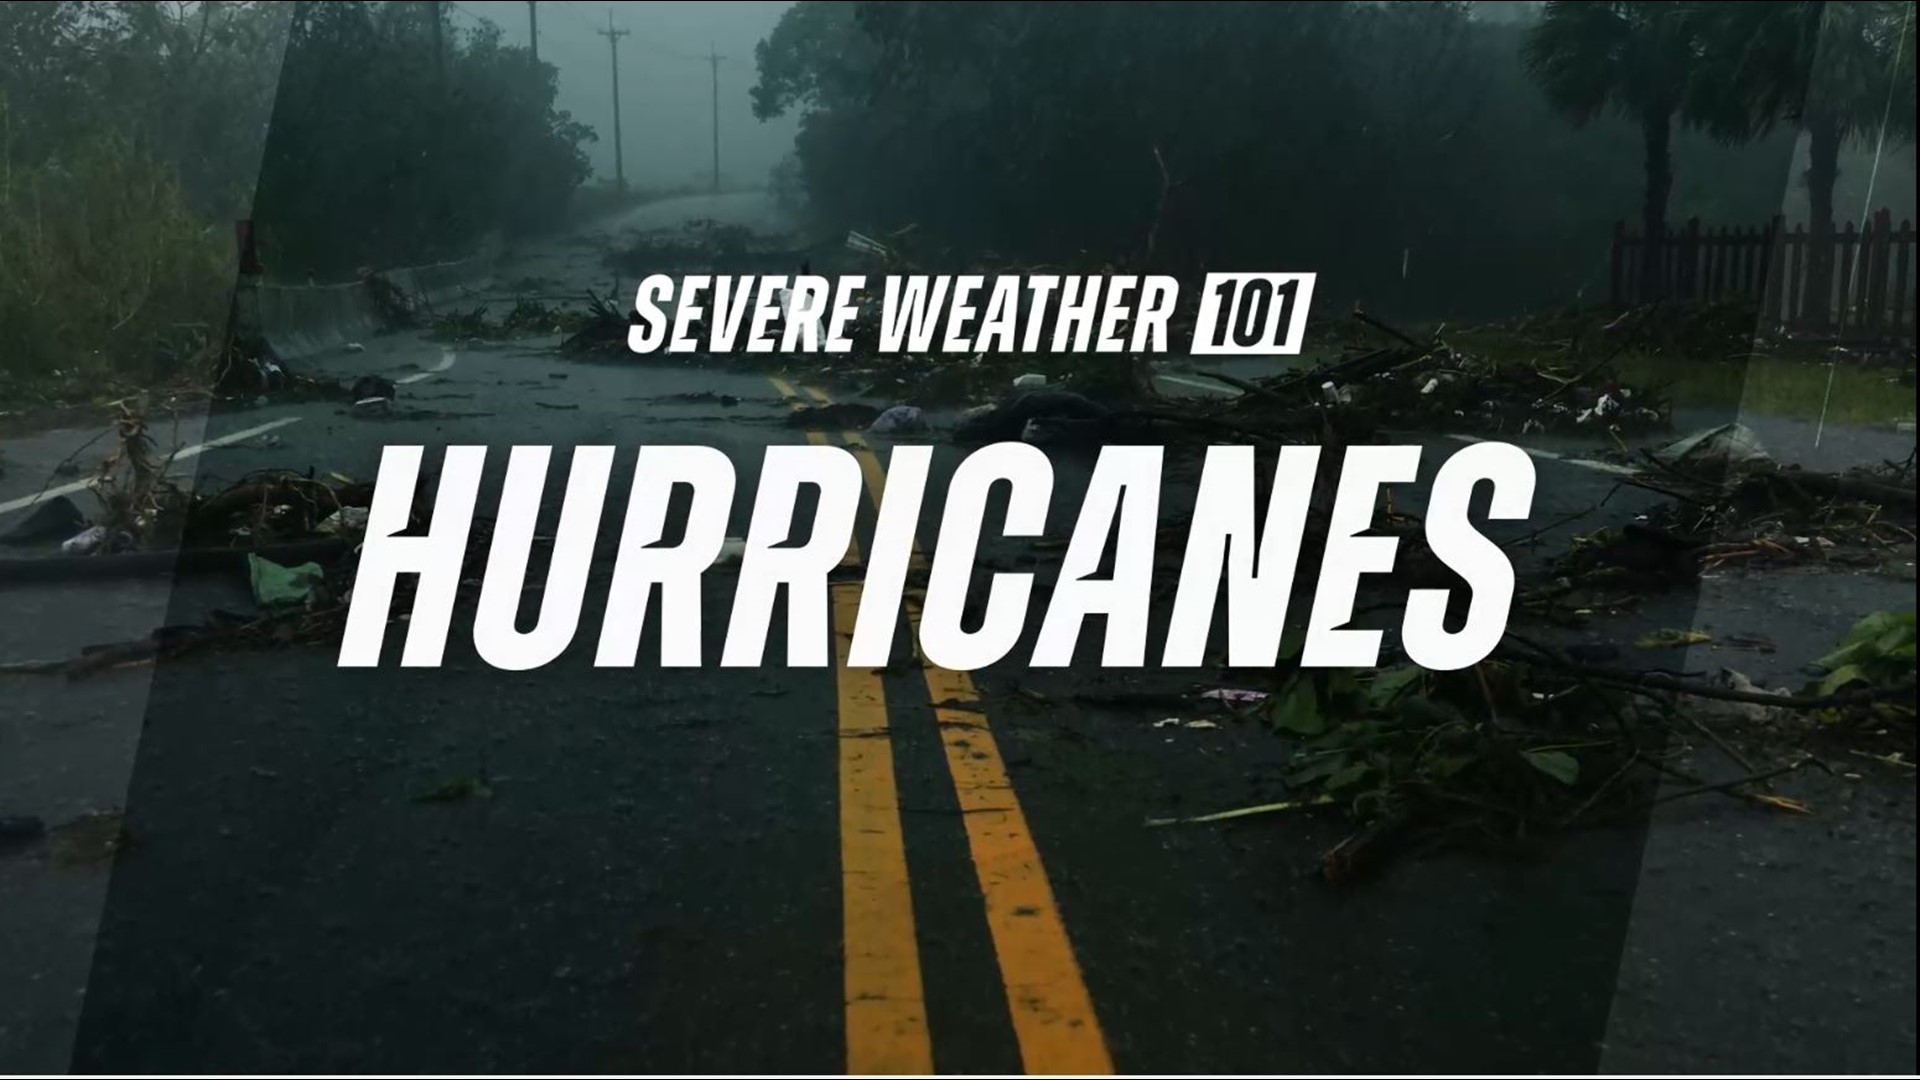 What you need to know about hurricanes from terminology to category strength and more. Plus tips on how to prepare your family and your home.